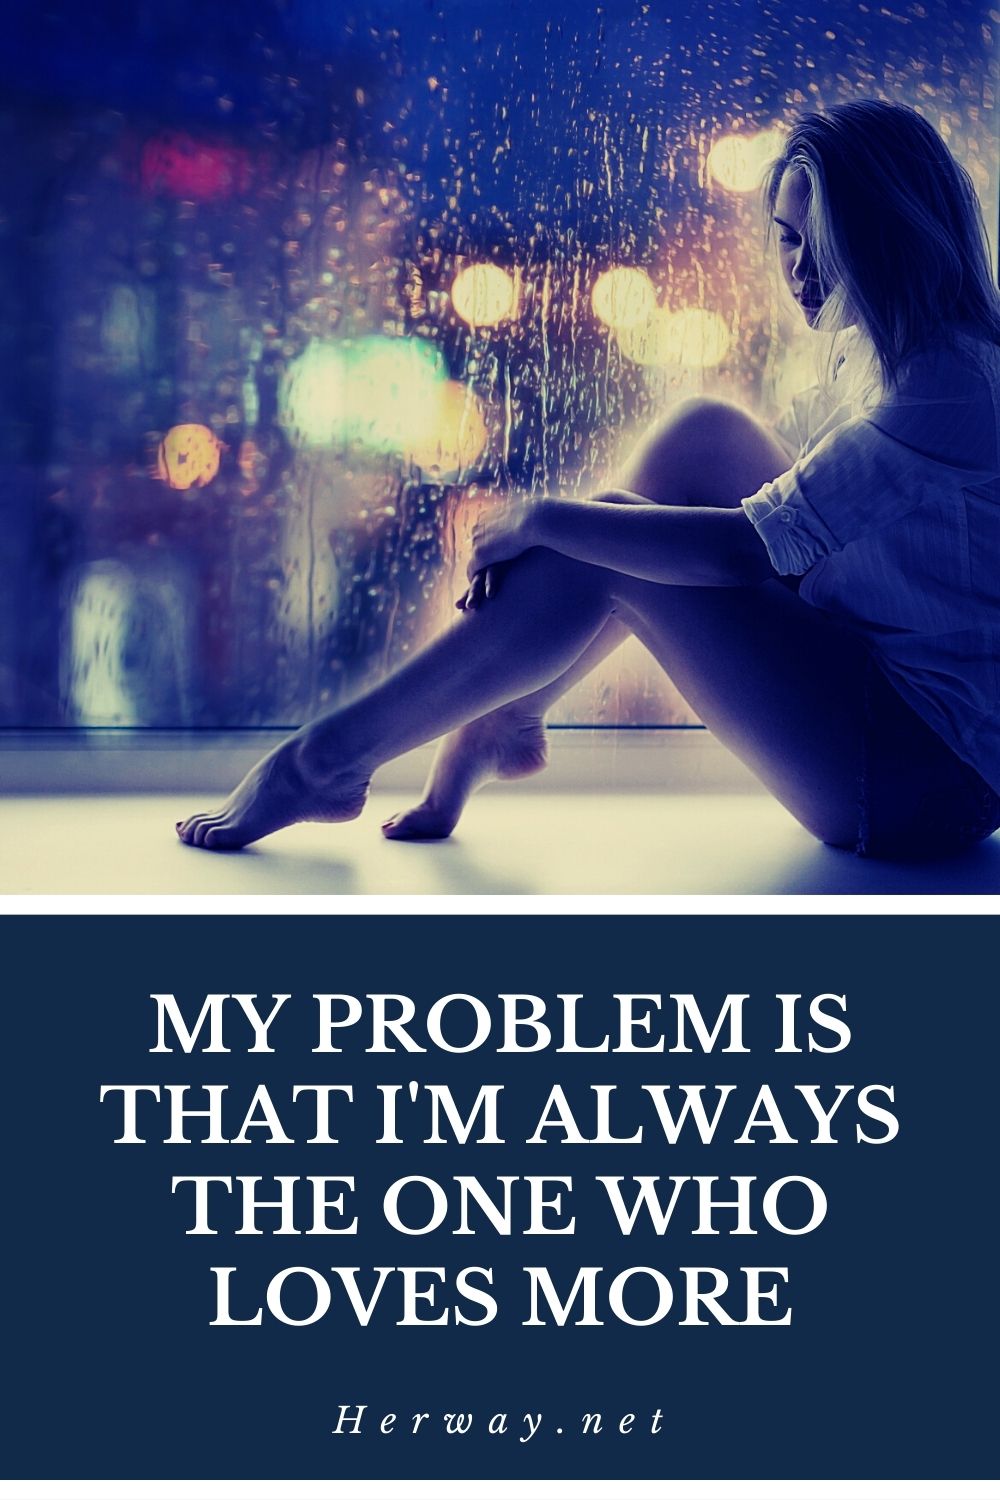 My Problem Is That I'm Always The One Who Loves More